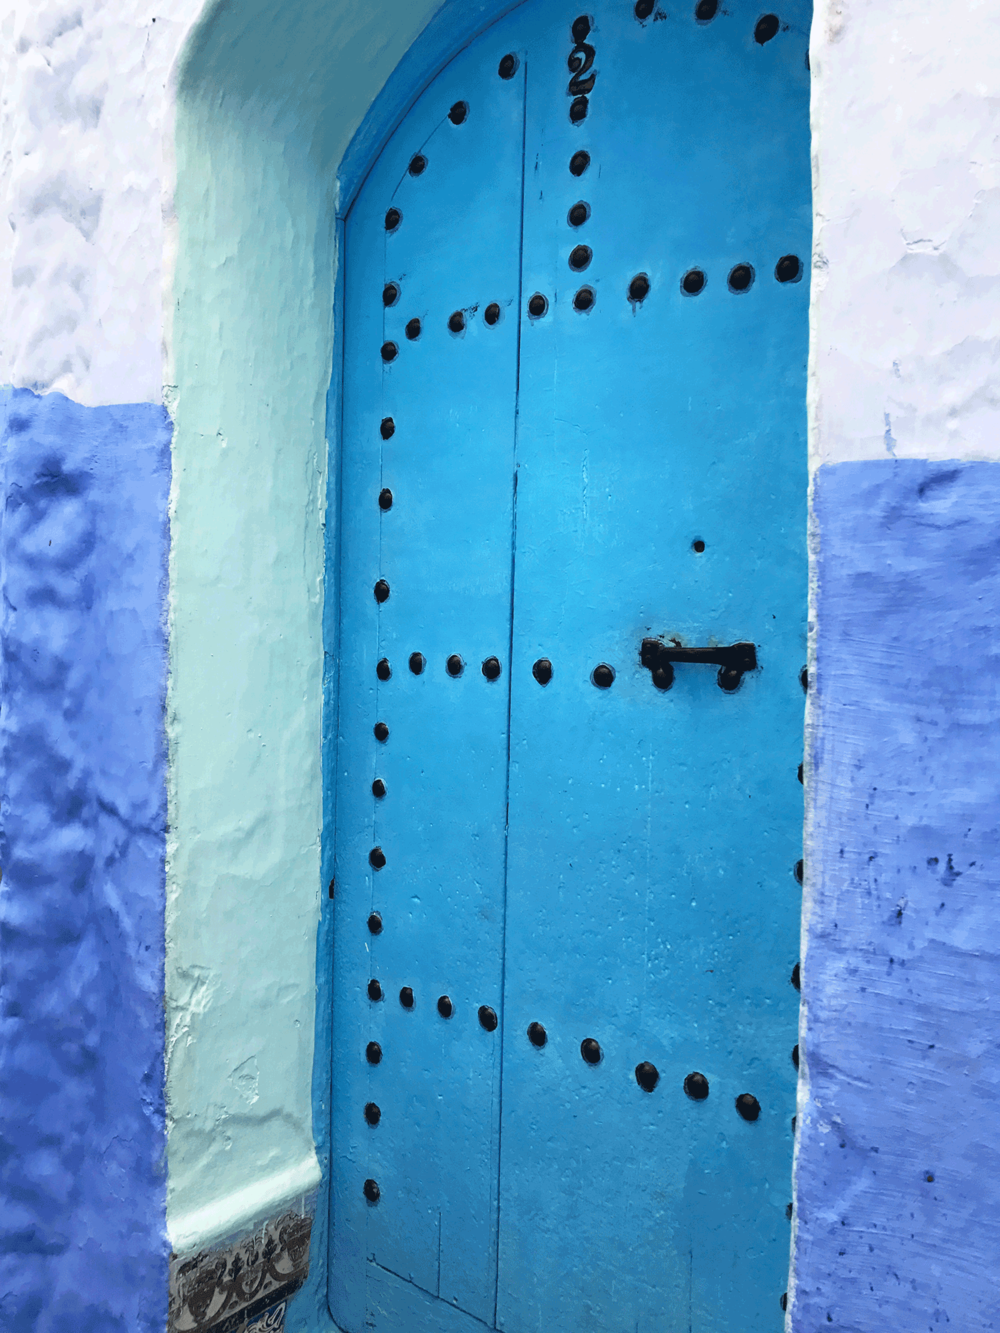 Chefchaouen-Morocco-image-blue-door-close-up.png